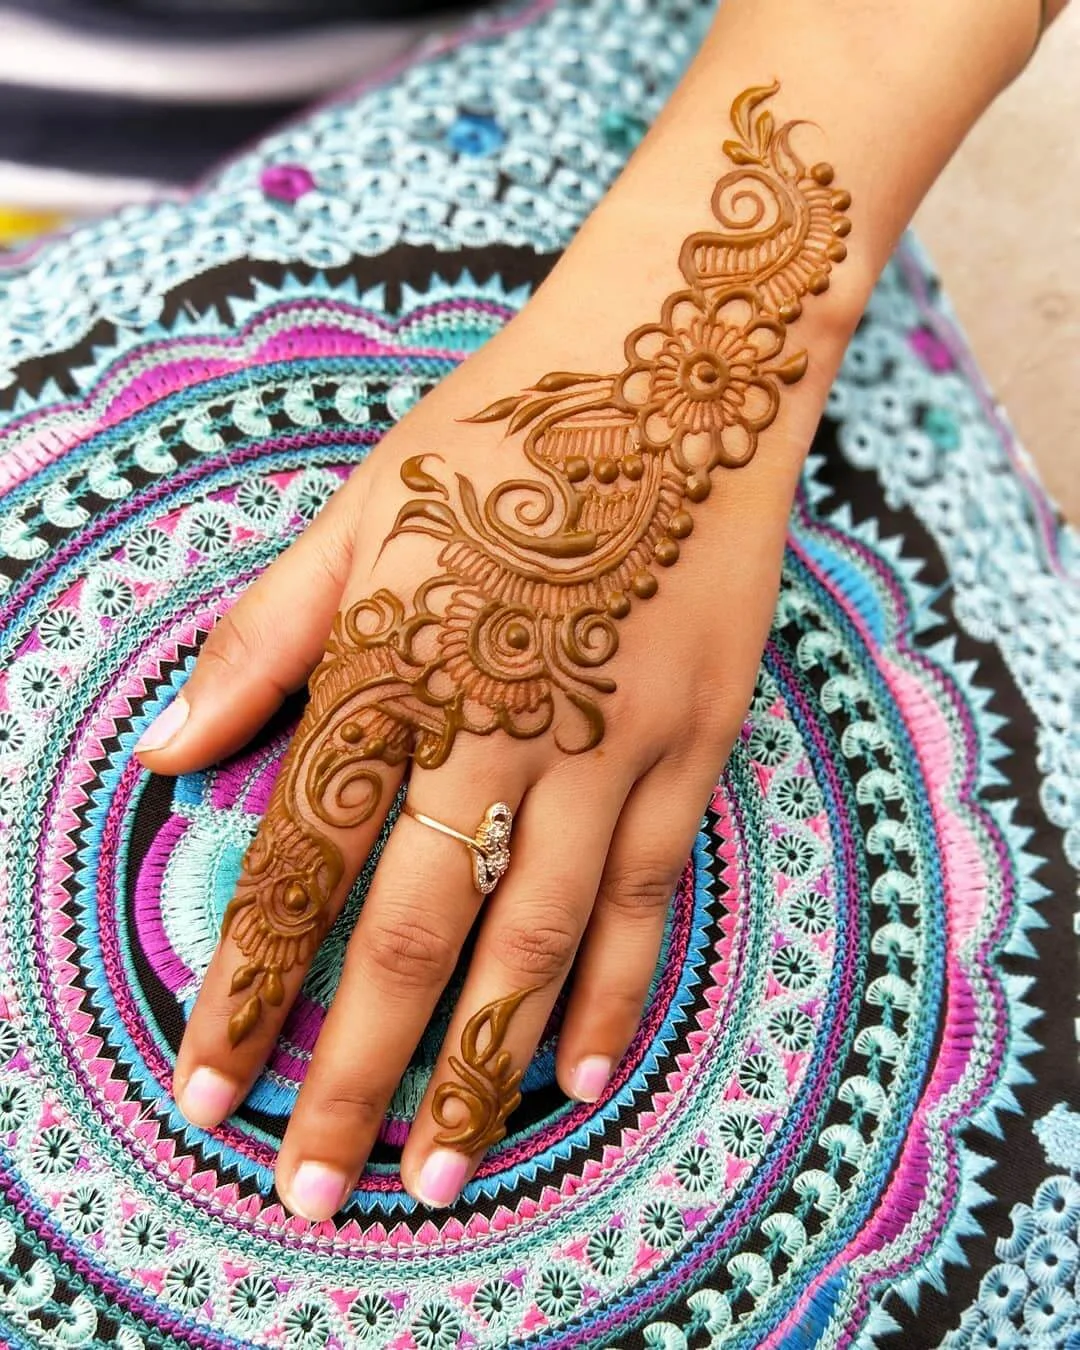 Cute Arabic Mehndi Designs 2021 with Videos for Hands ...